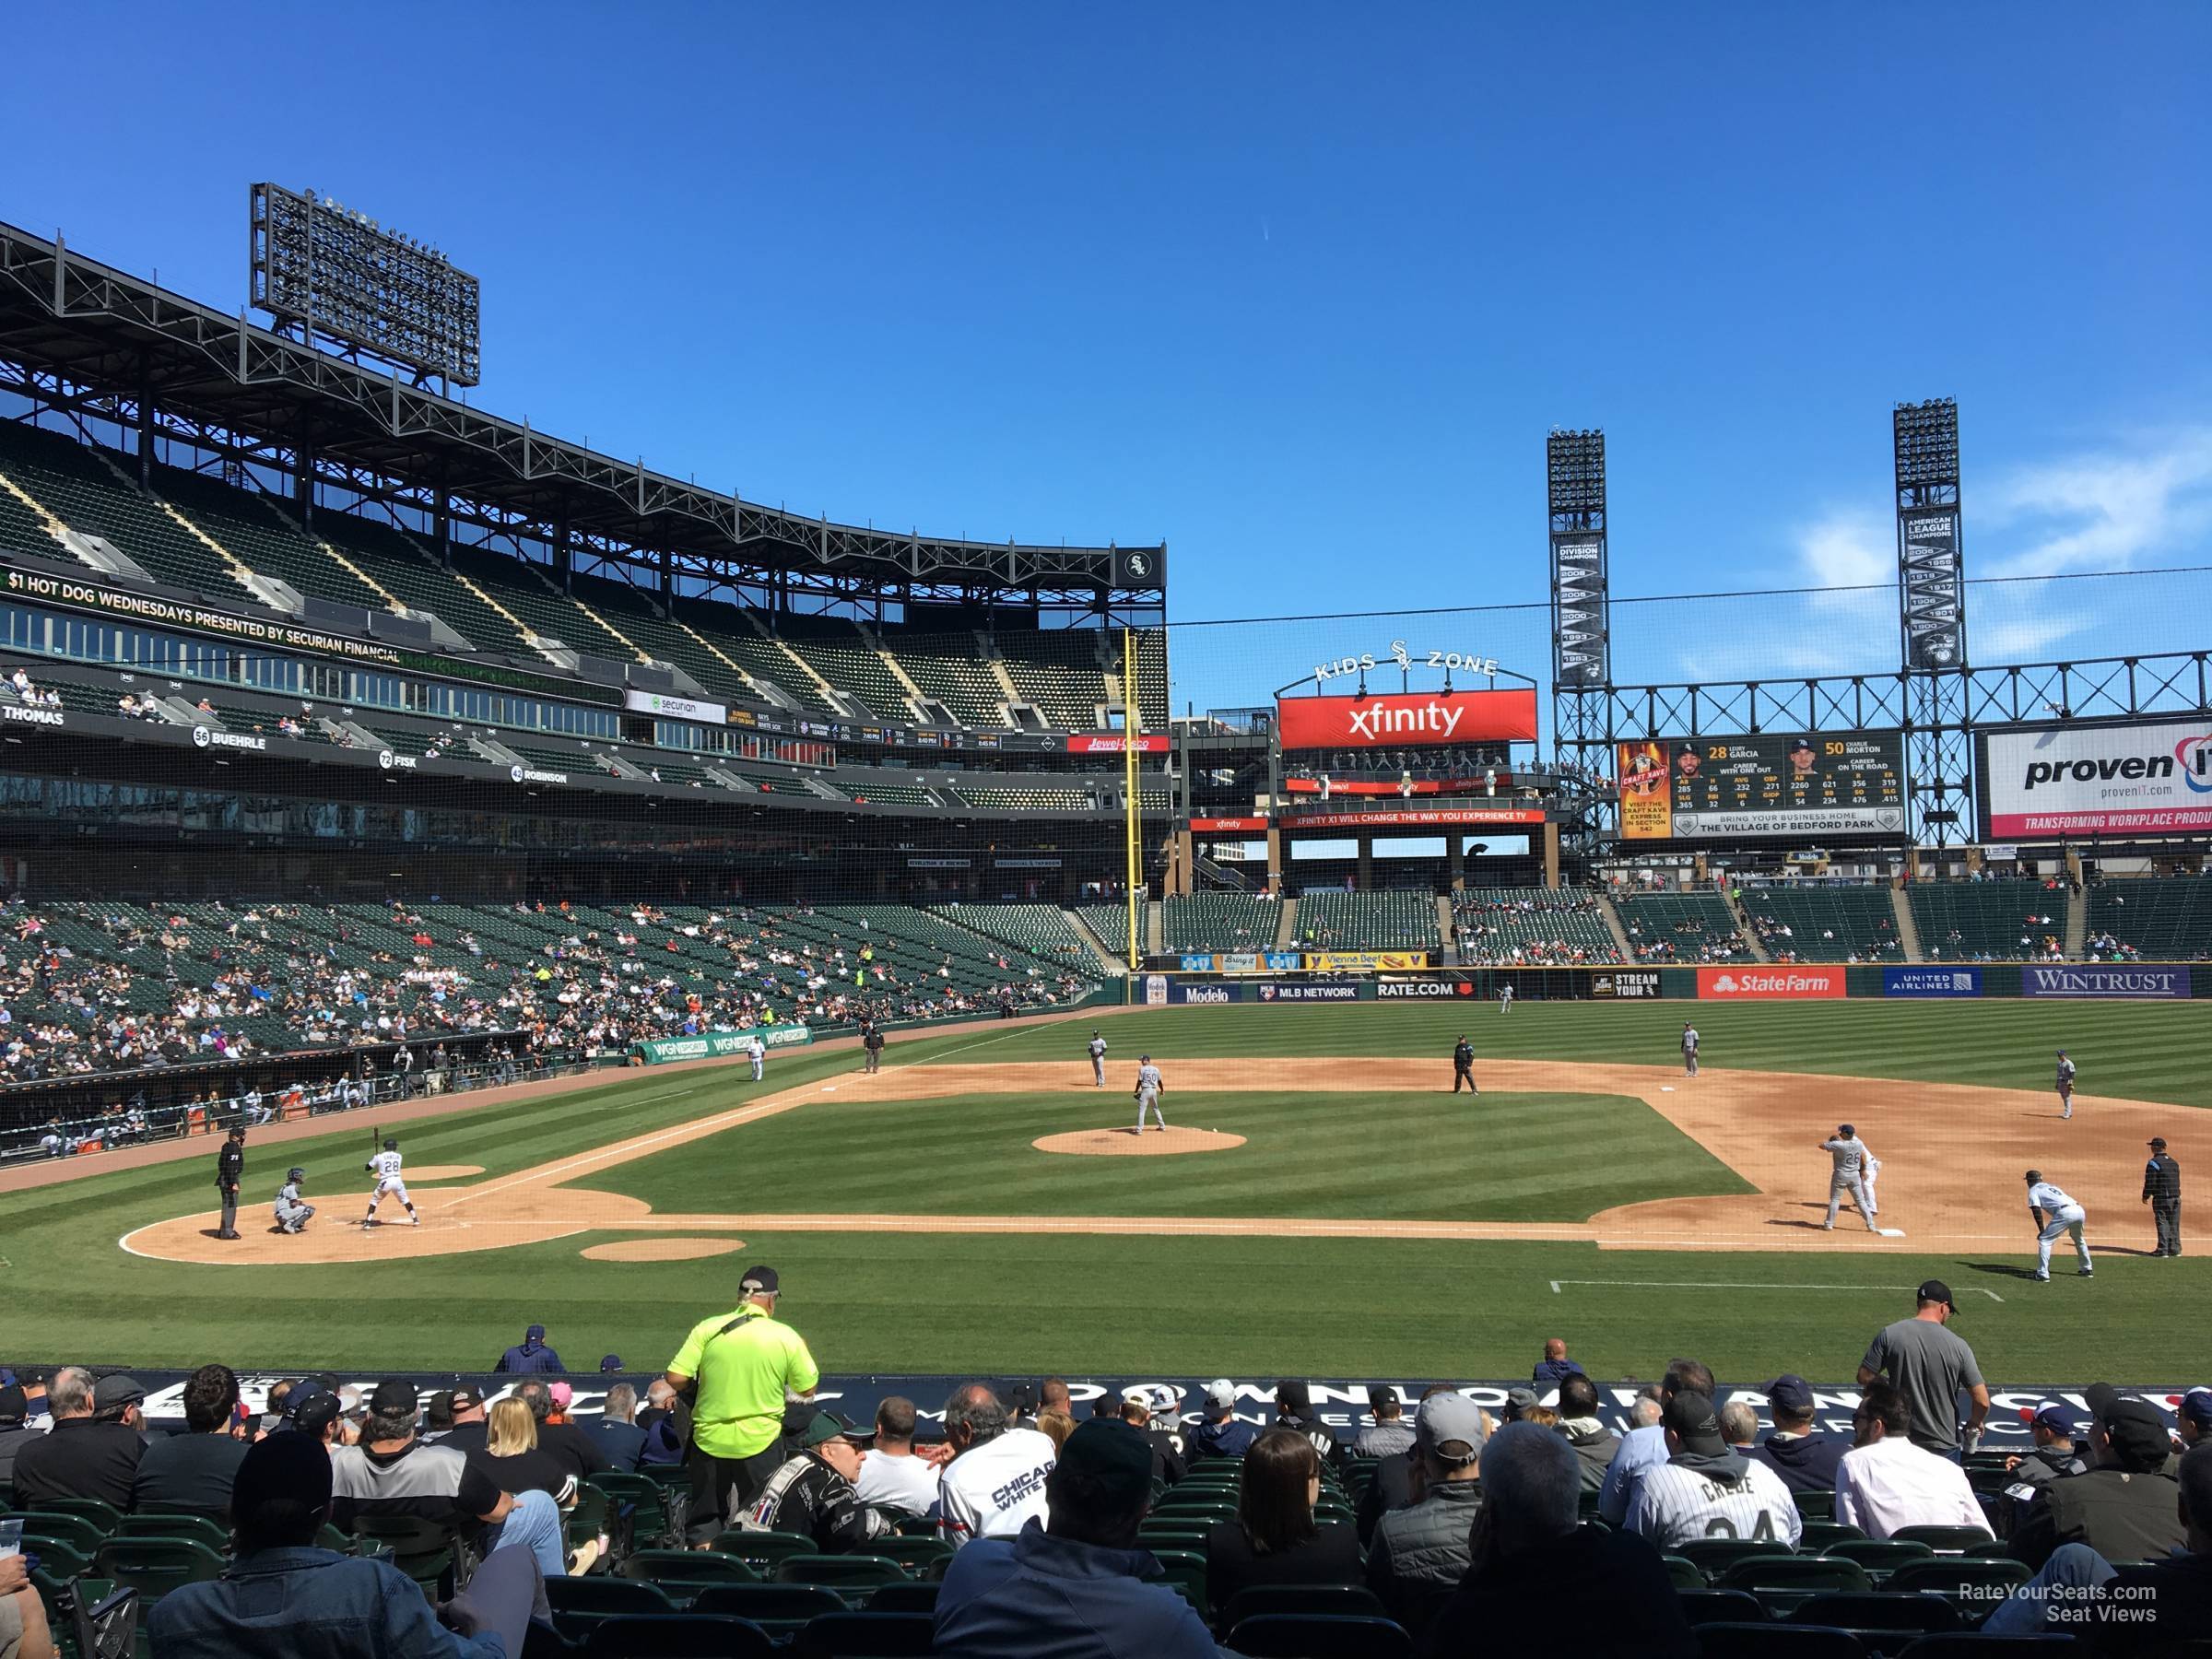 section 125, row 25 seat view  - guaranteed rate field